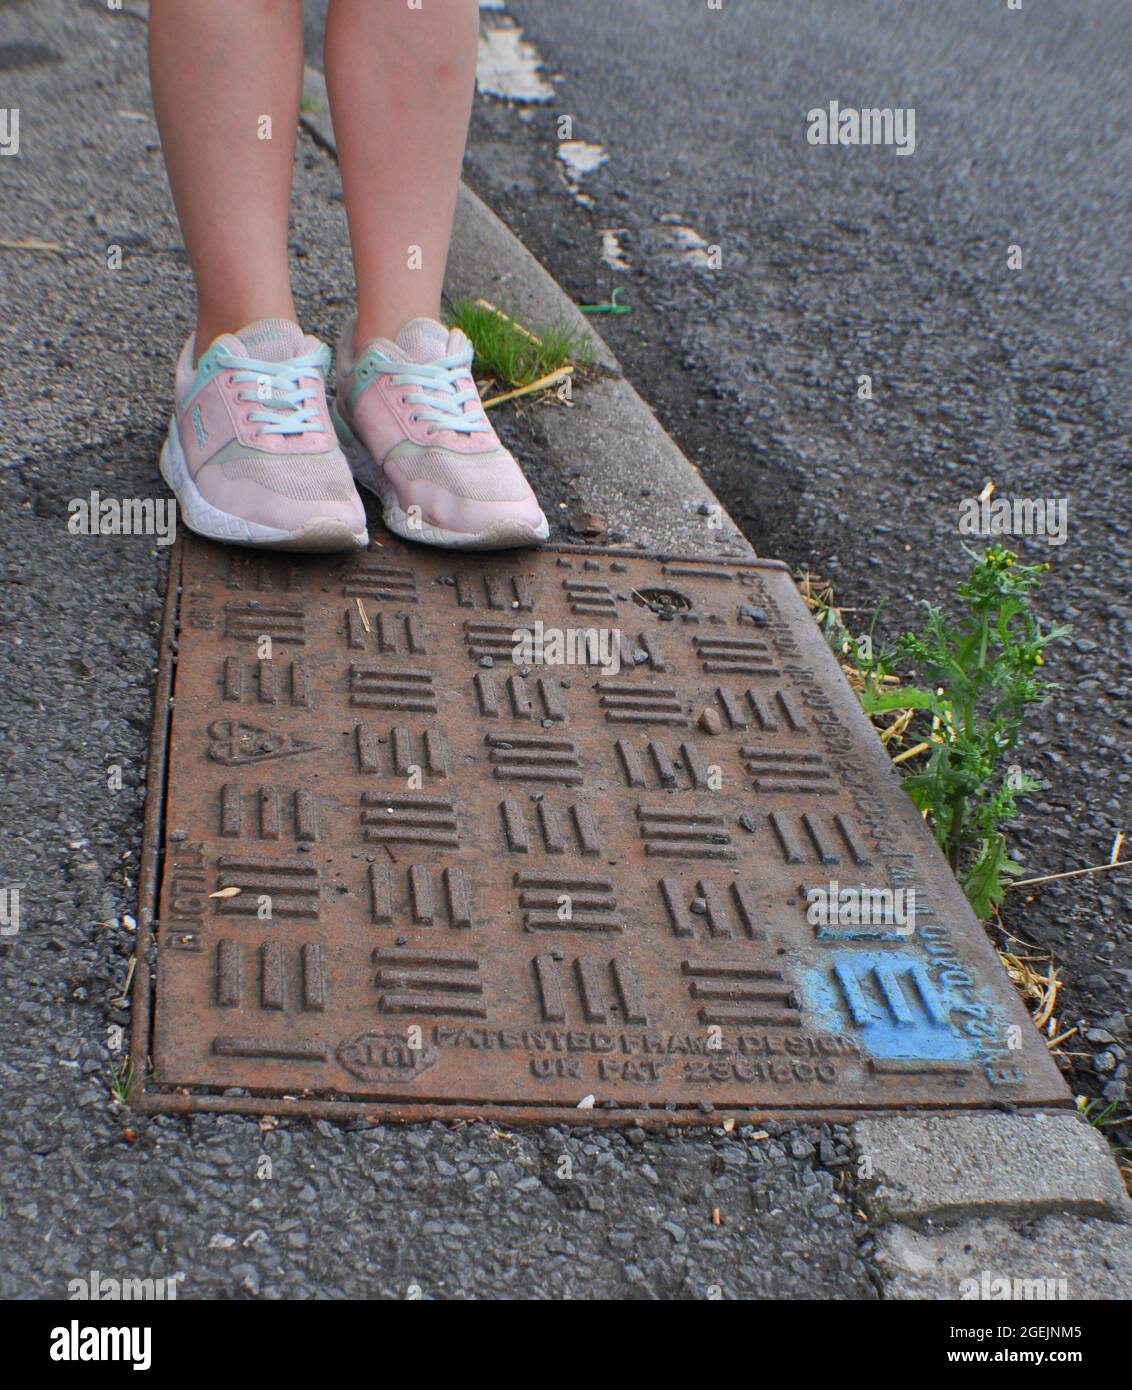 Man hole cover on the edge of a pavement. A blue dot of spray paint on the corner indicates it has been inspected. A child is standing at the edge Stock Photo